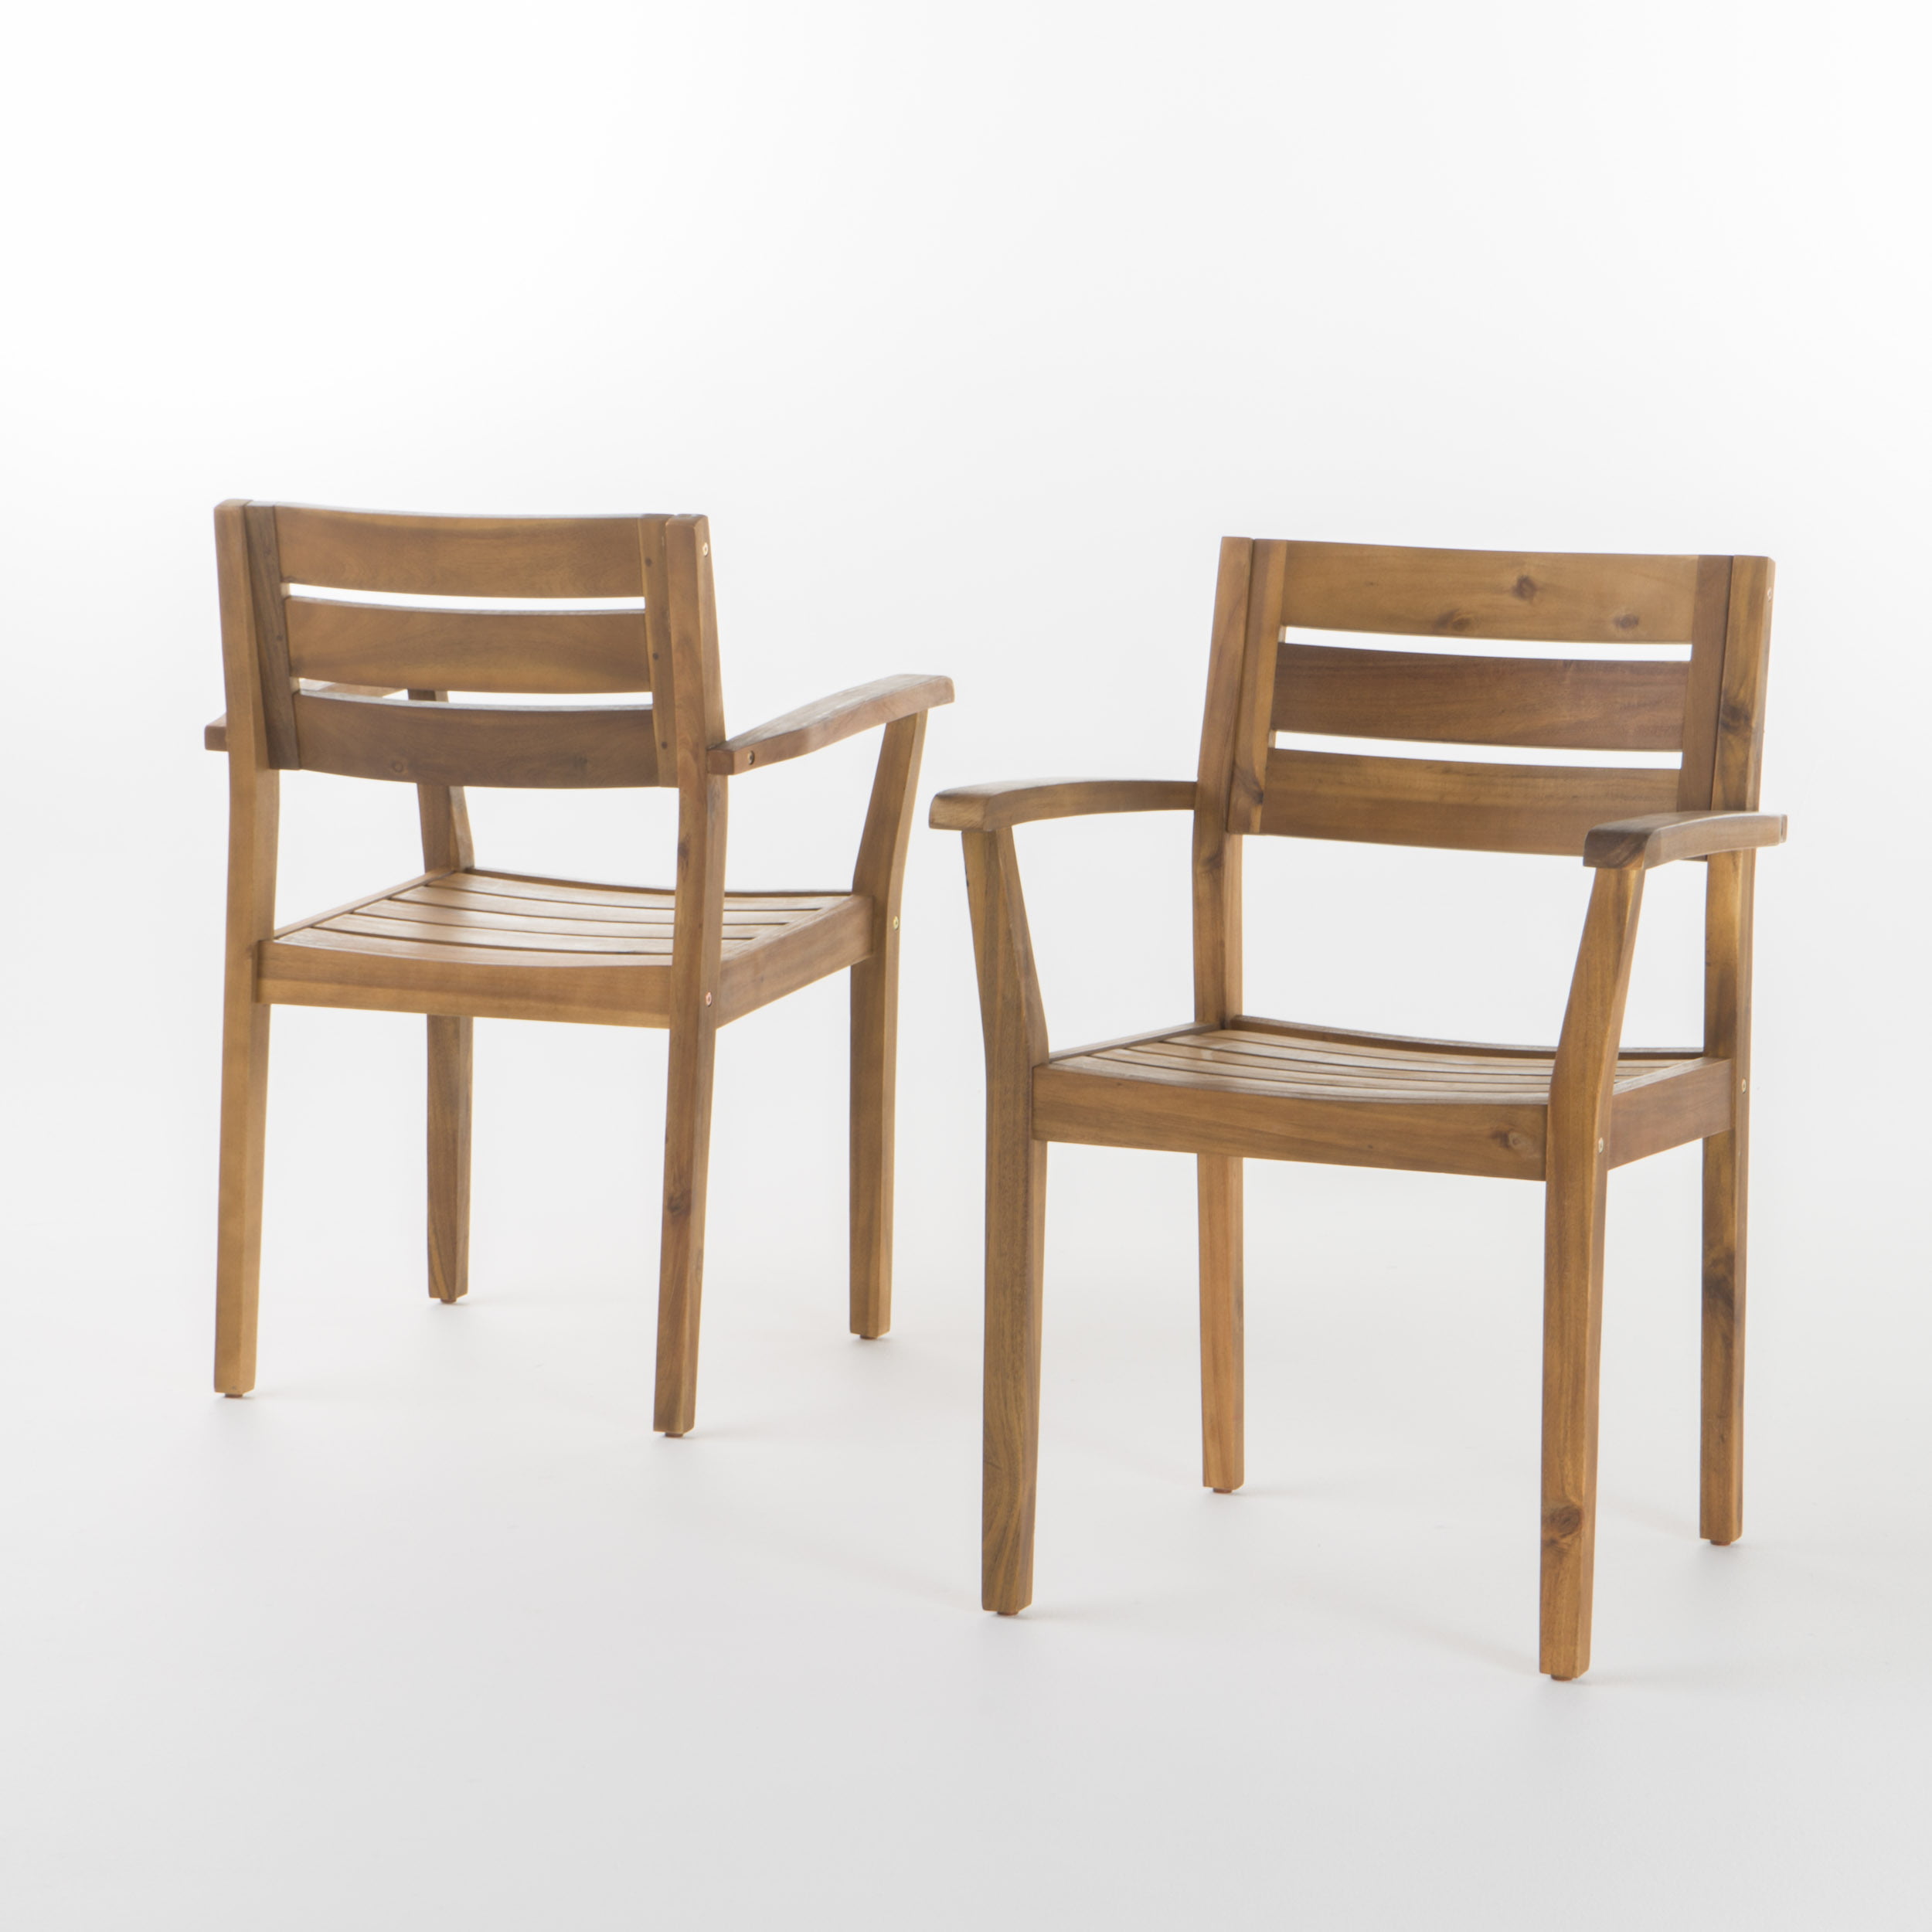 Stanyan Outdoor Acacia Wood Dining Chairs, Set of 2, Teak Finish